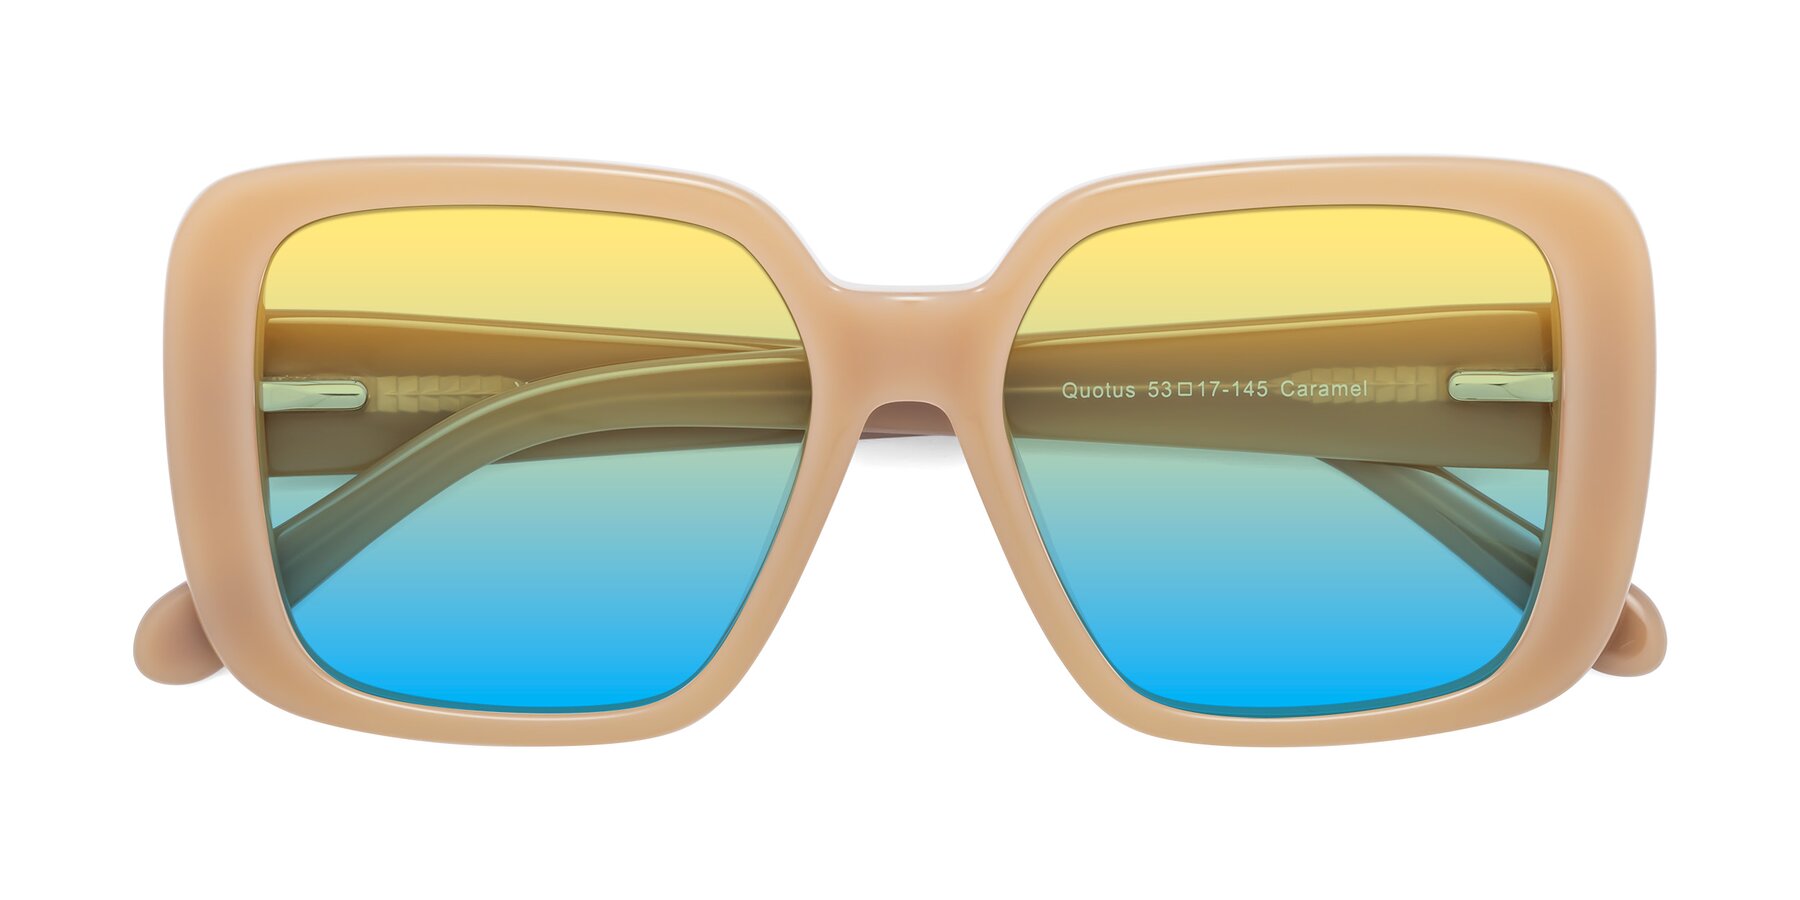 Folded Front of Quotus in Caramel with Yellow / Blue Gradient Lenses